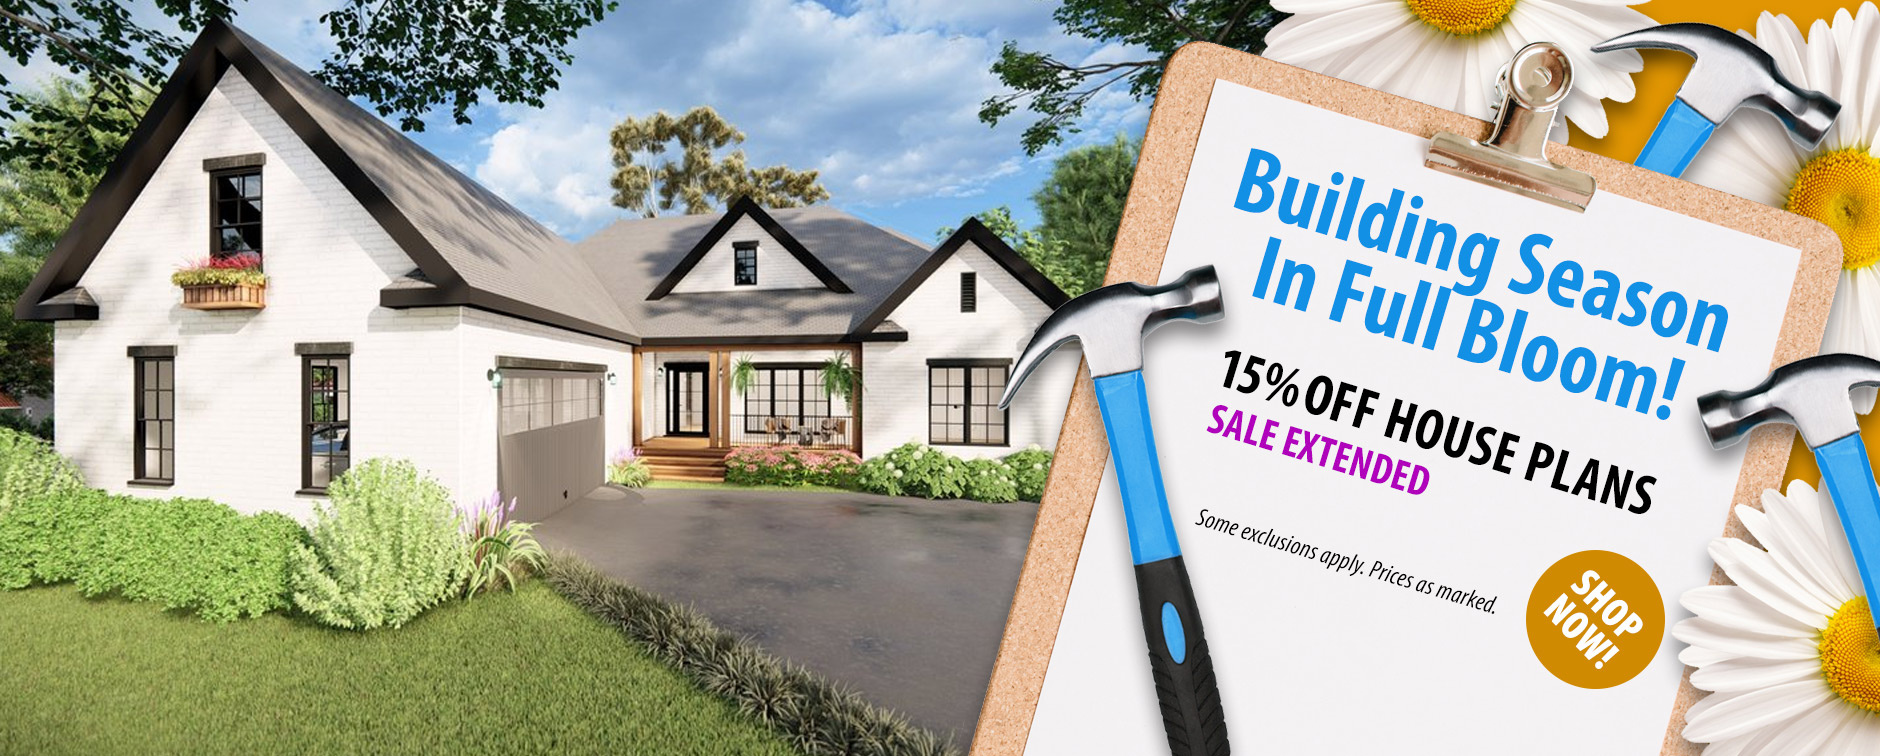 Shop the Spring Planning Event and Get 15% Off House Plans - Offer Extended for a Limited Time